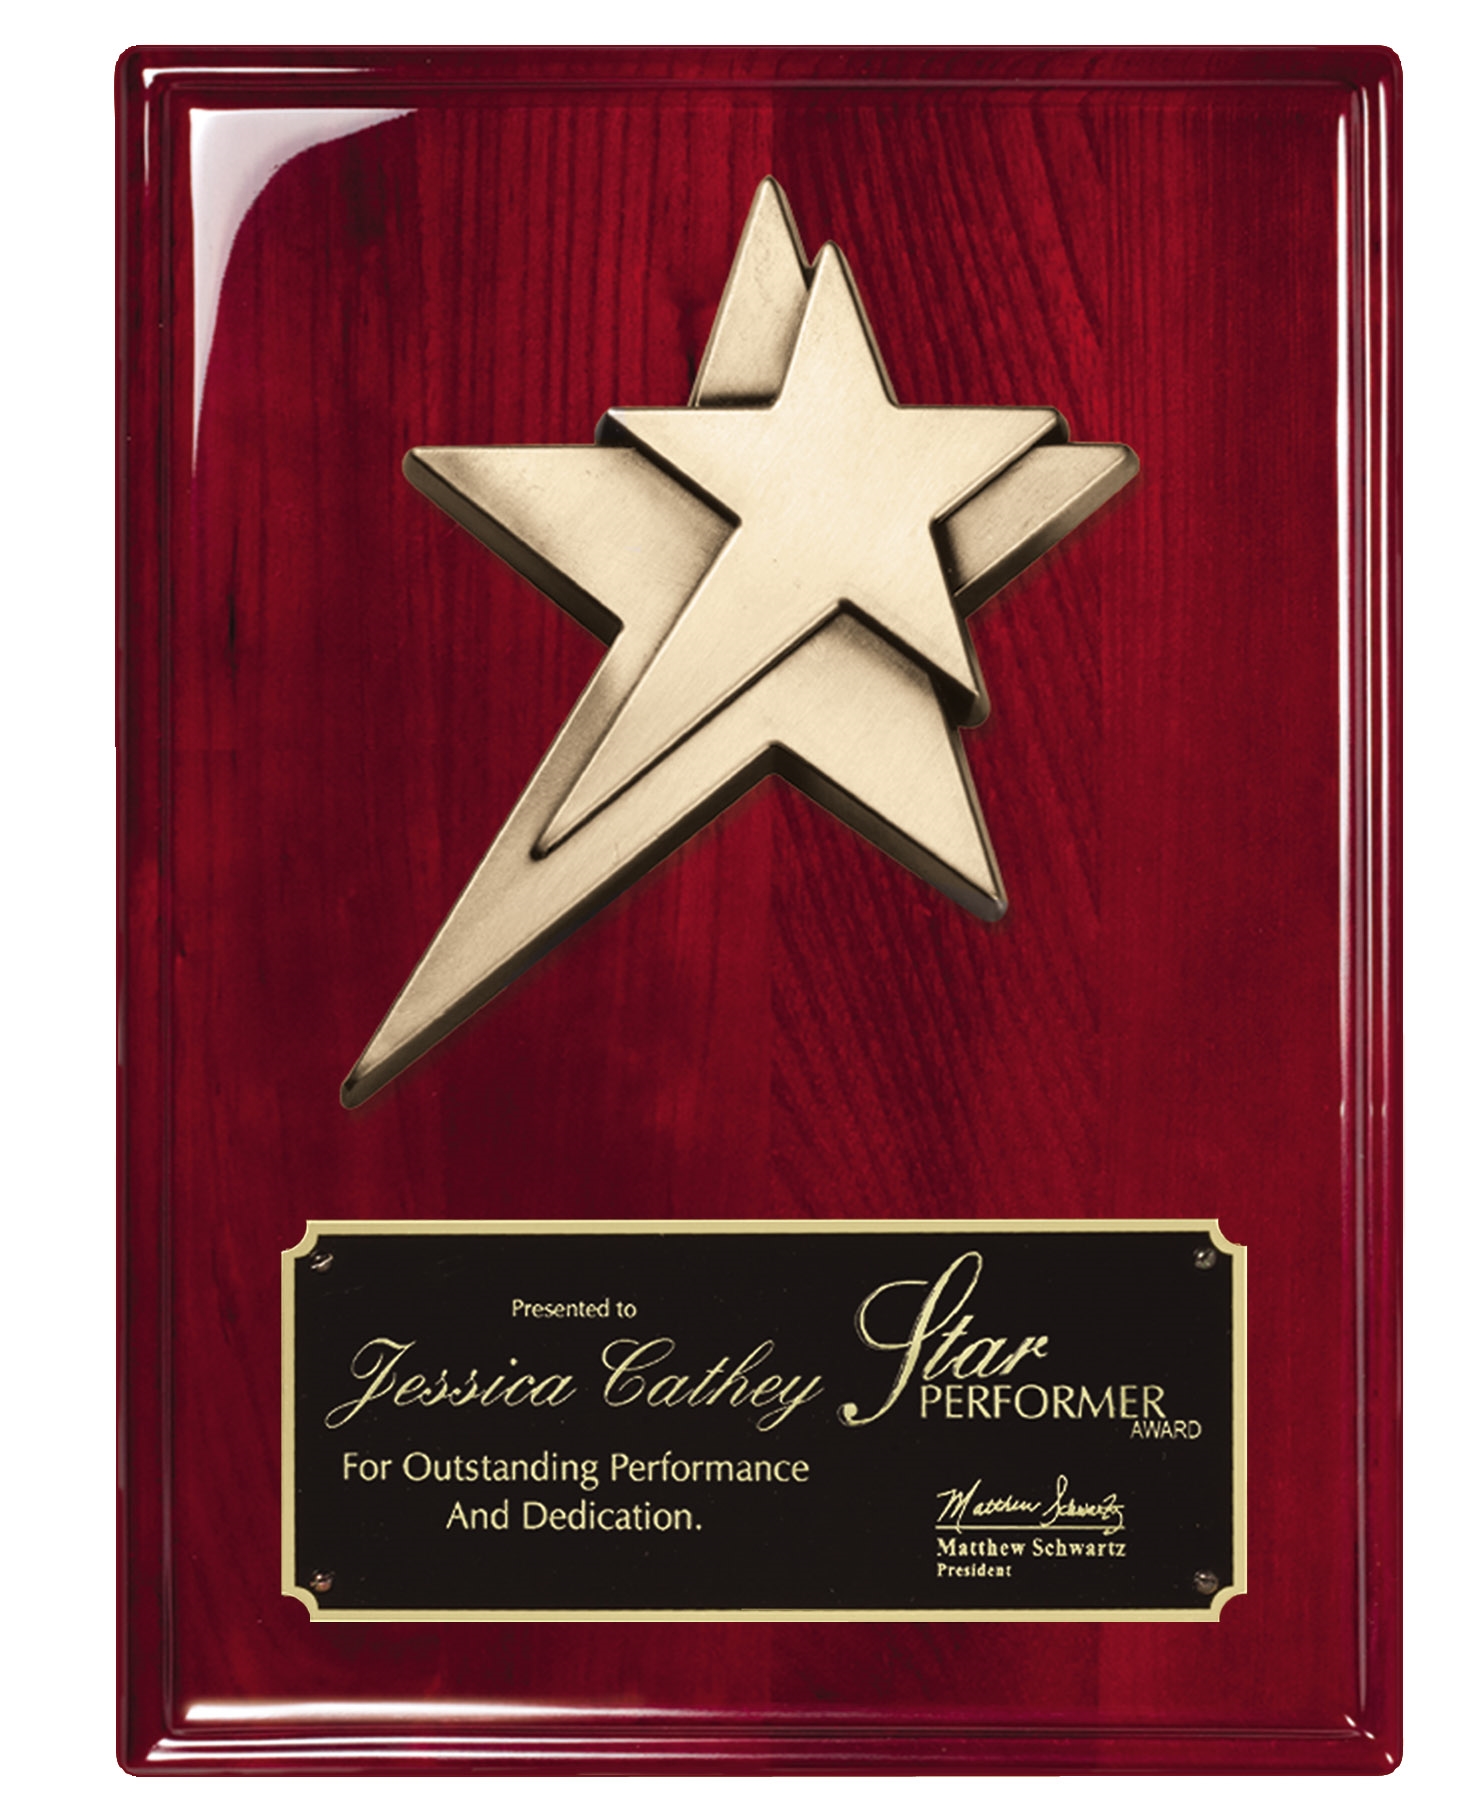 8 x 10 Rosewood Piano Finish Plaque with Star